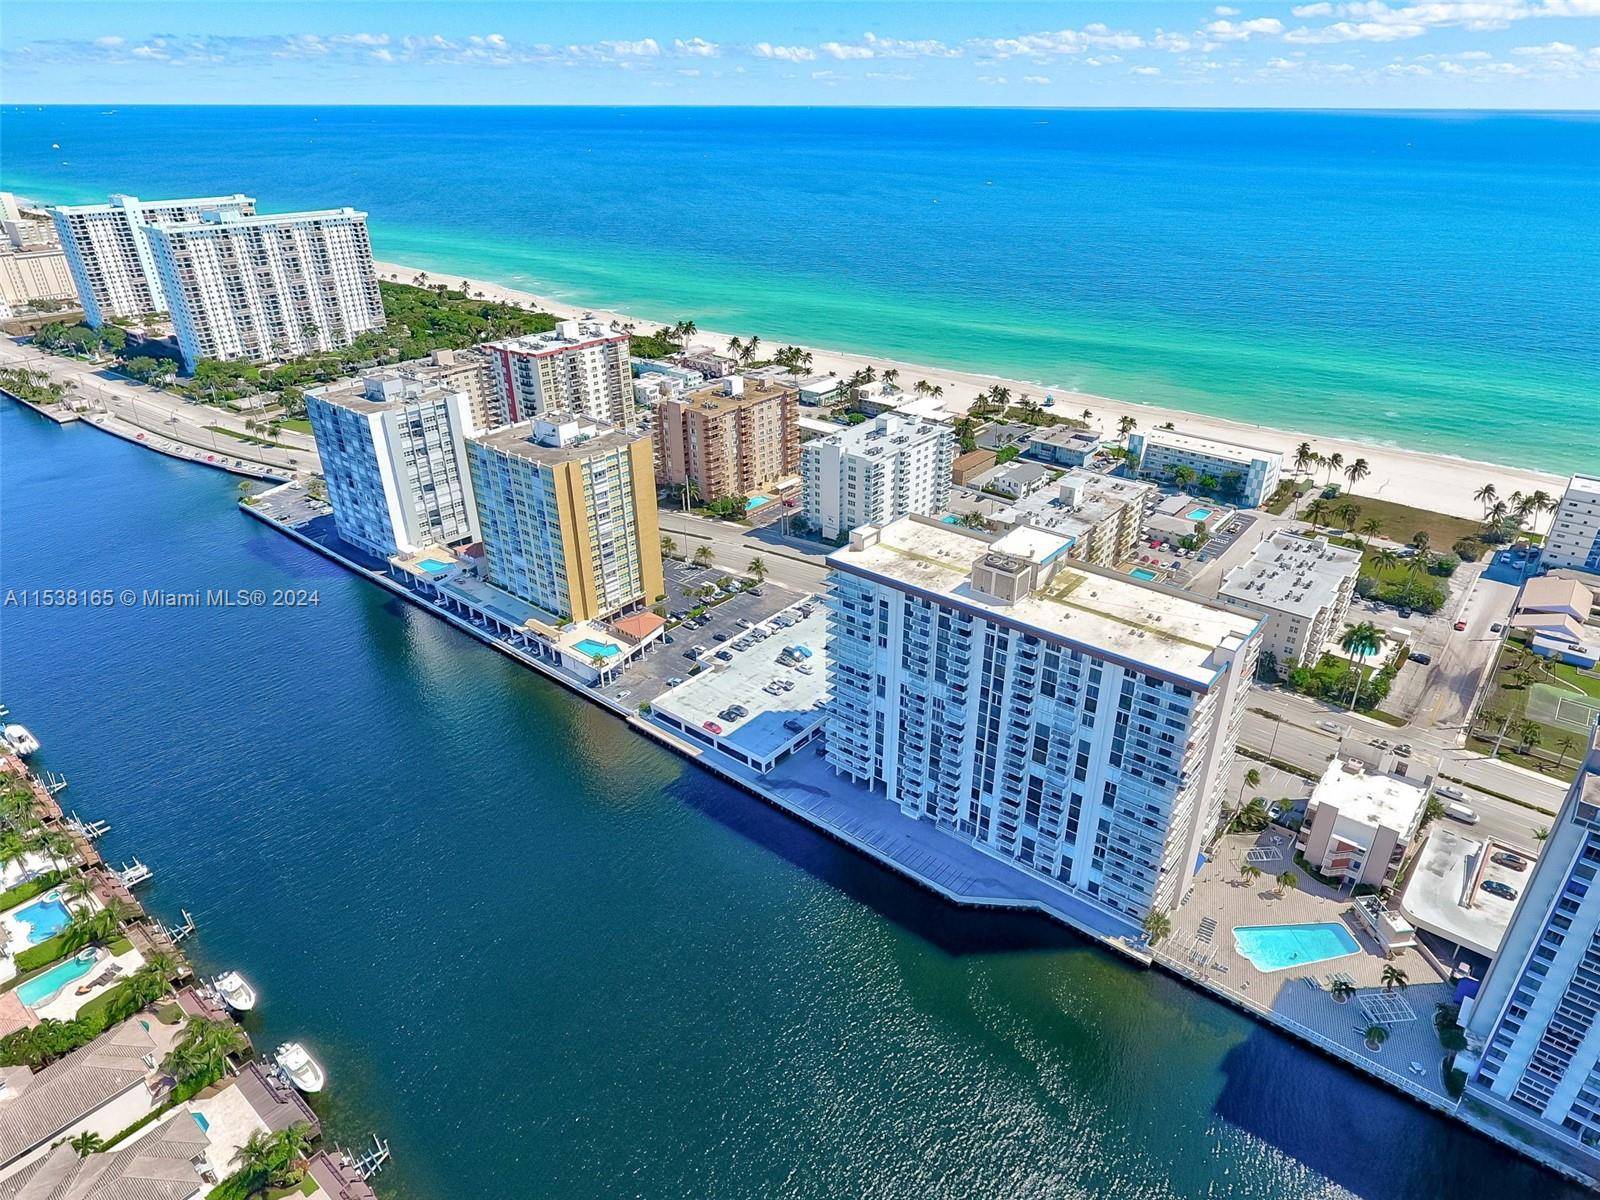 WALK IN AND FALL IN LOVE WITH THIS AMAZING MASTERFULLY UPDATED, SPACIOUS BRIGHT CORNER CONDO, THAT FACES THE OCEAN AND FROM THE WRAP AROUND BALCONY INTRACOASTAL POOL VIEW.